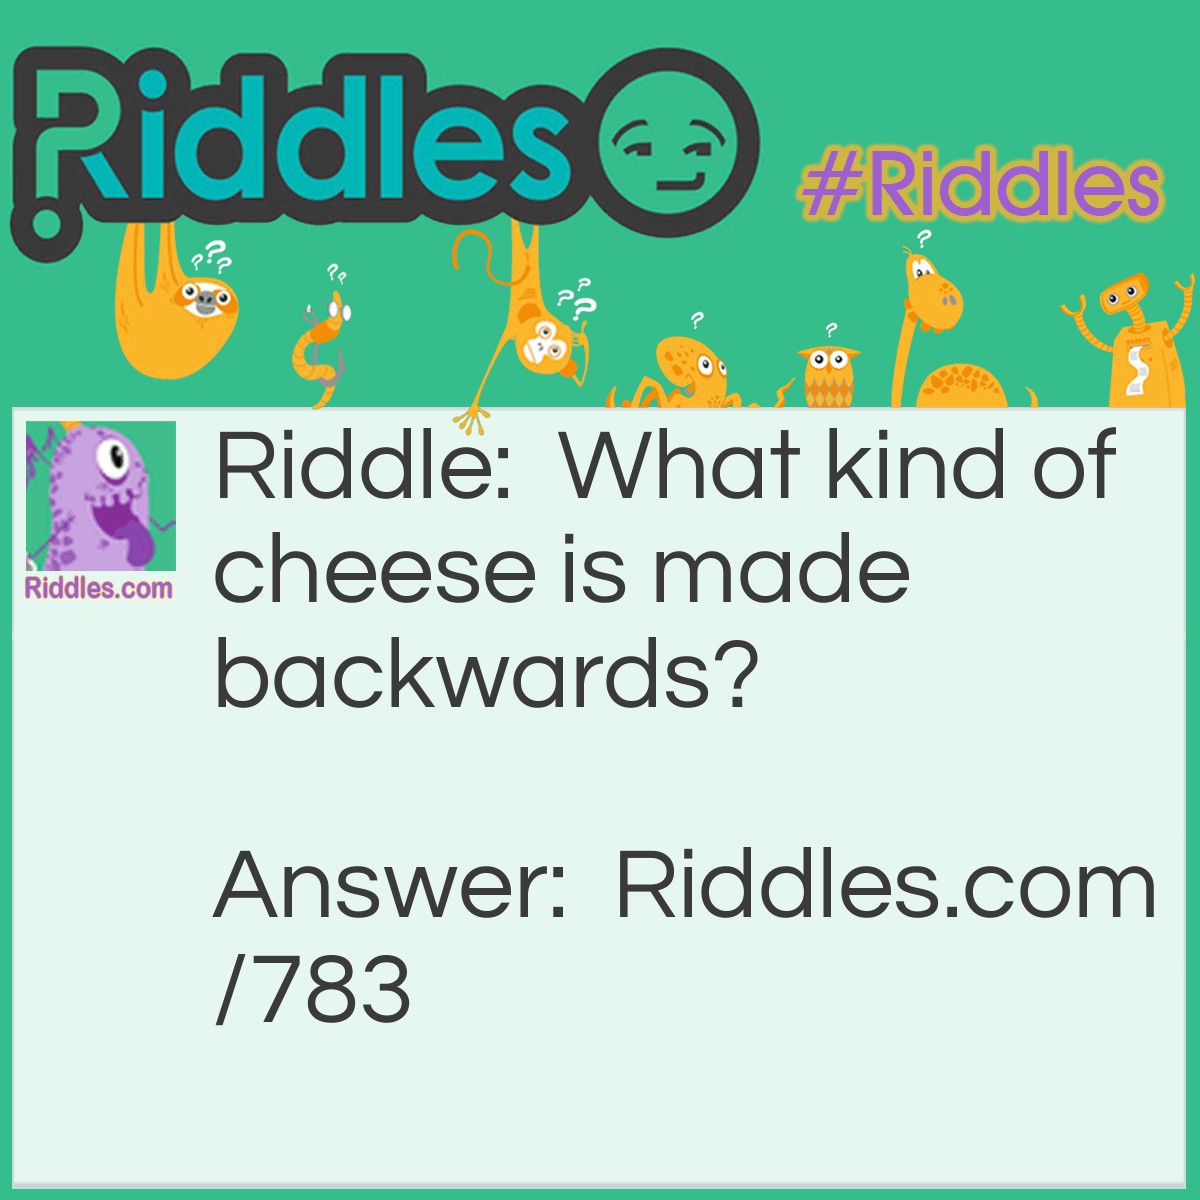 Riddle: What kind of cheese is made backwards? Answer: EDAM cheese. ( 'made' backwards is edam )